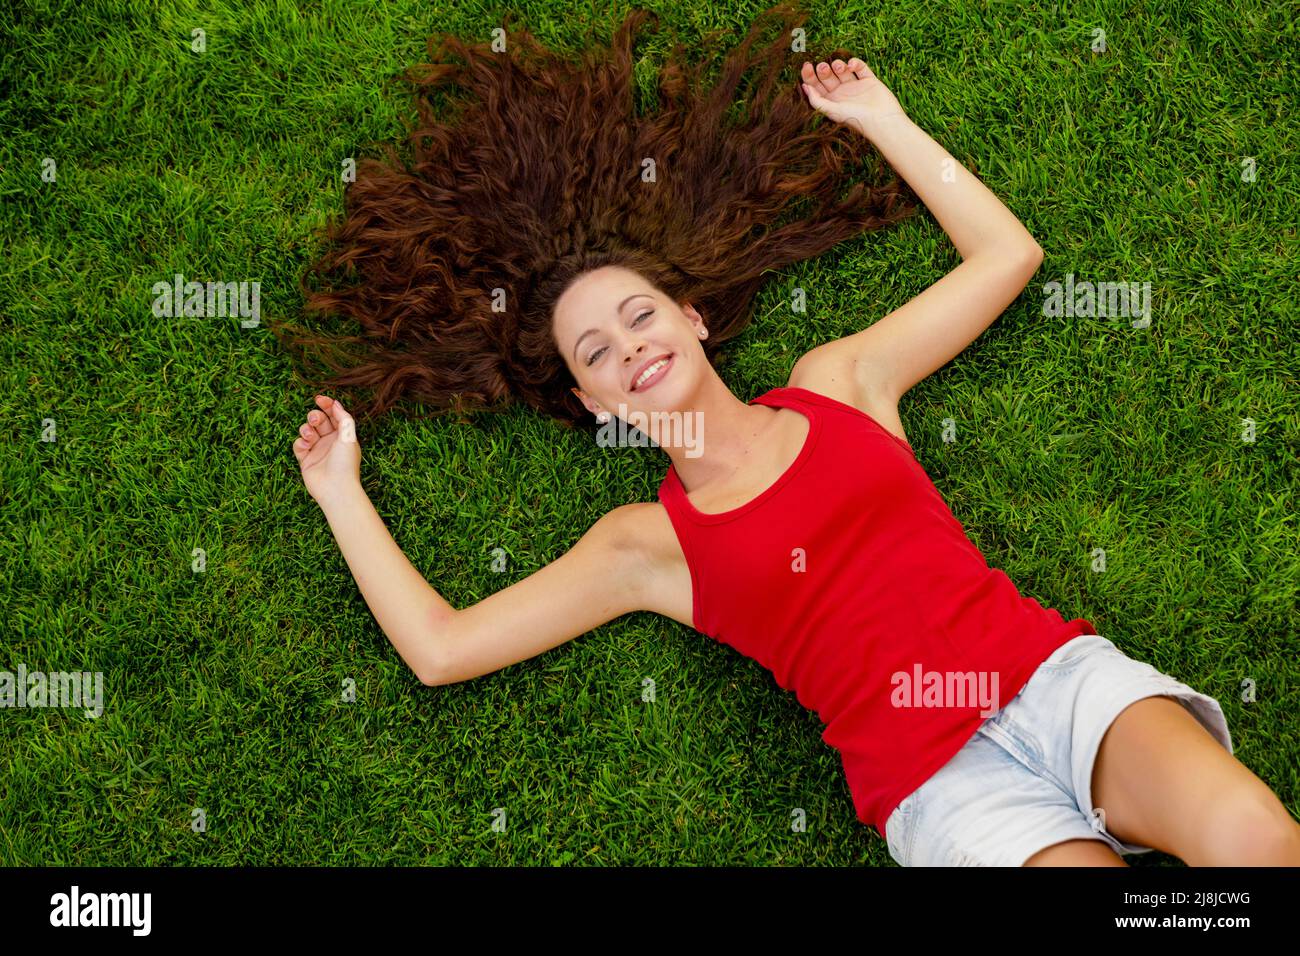 Outdoor portrait of a beautiful young woman lying on the grass Stock Photo